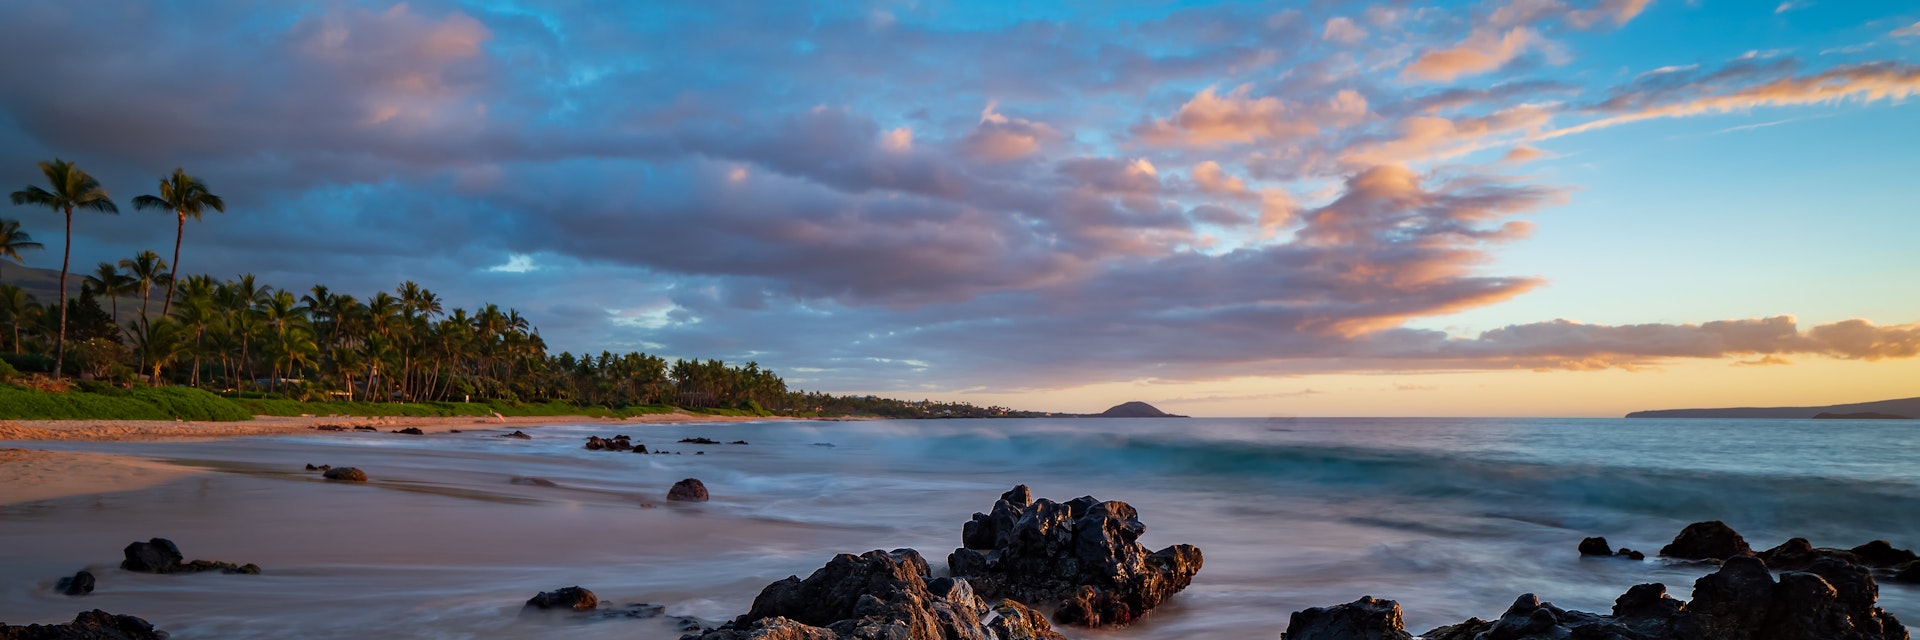 Keawakapu Beach on Maui at sunset with lava rocks in foreground.
1732402321
bay, beach, bird, body of water, cloud, clouds, coast, dawn, dramatic, dusk, evening, hawaii, island, keawakapu beach, landscape, lava rocks, maui, nature, ocean, outdoor, outdoors, promontory, river, rock, rocks, sand, sea, shore, sky, sunrise, sunset, travel, united states, vacation, water